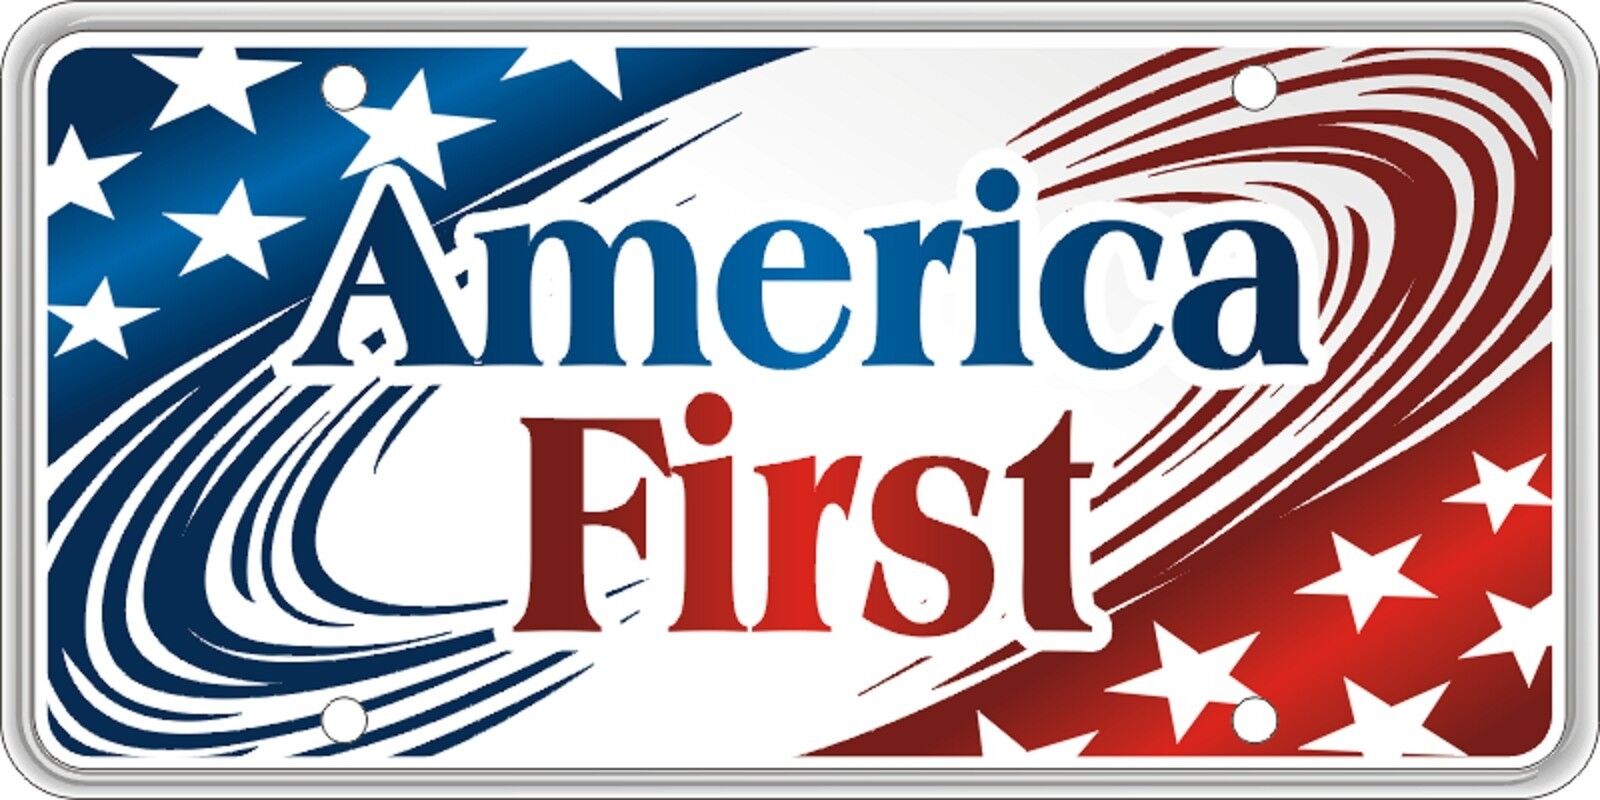 America First Stars and Striped License Plate SVUSA1ST06